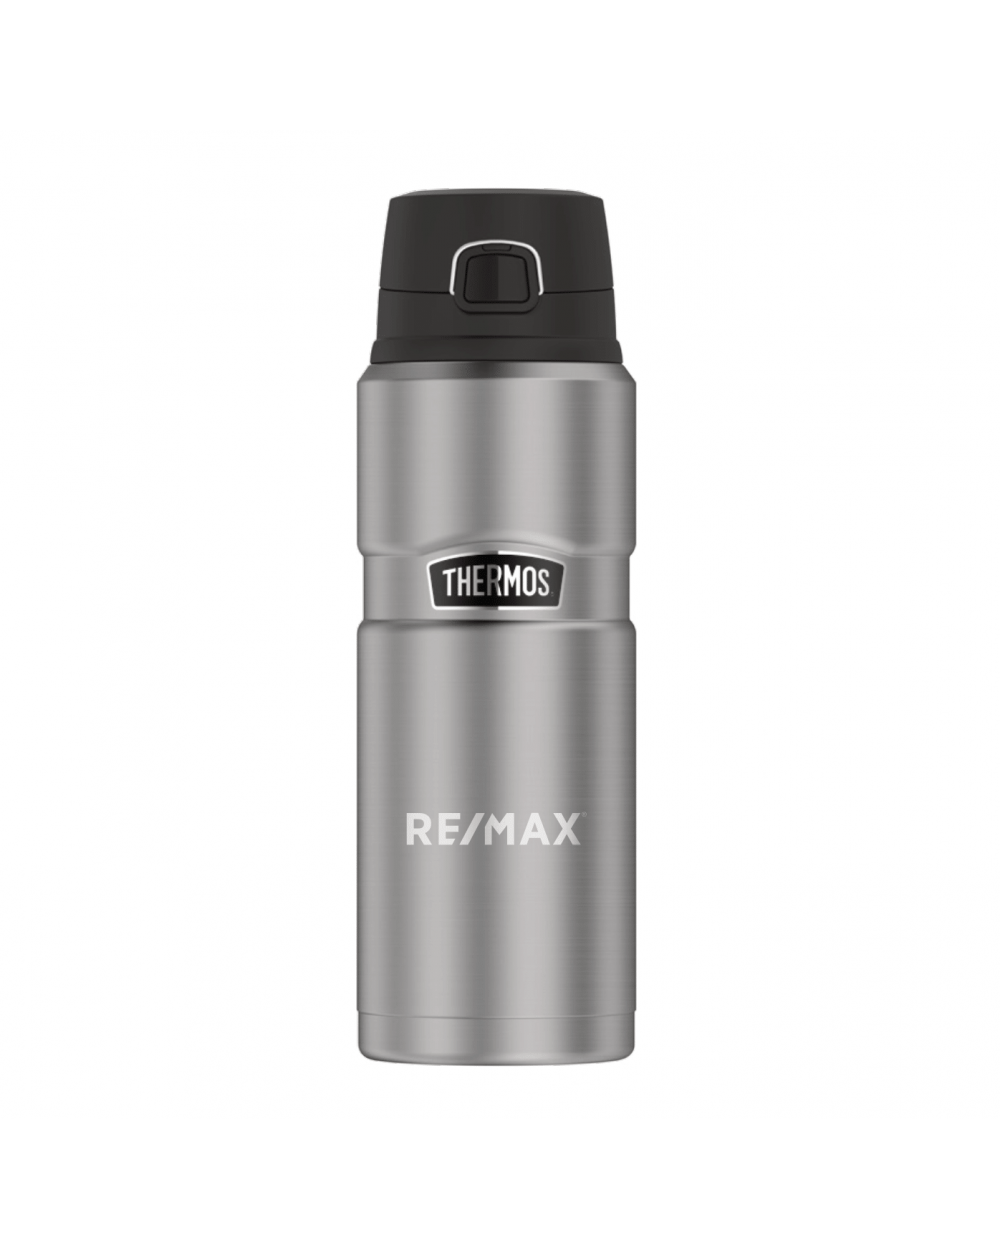 https://remax.blinkswag.com/16459-large_default/24-oz-thermos-stainless-king-stainless-steel-direct-drink-bottle.jpg